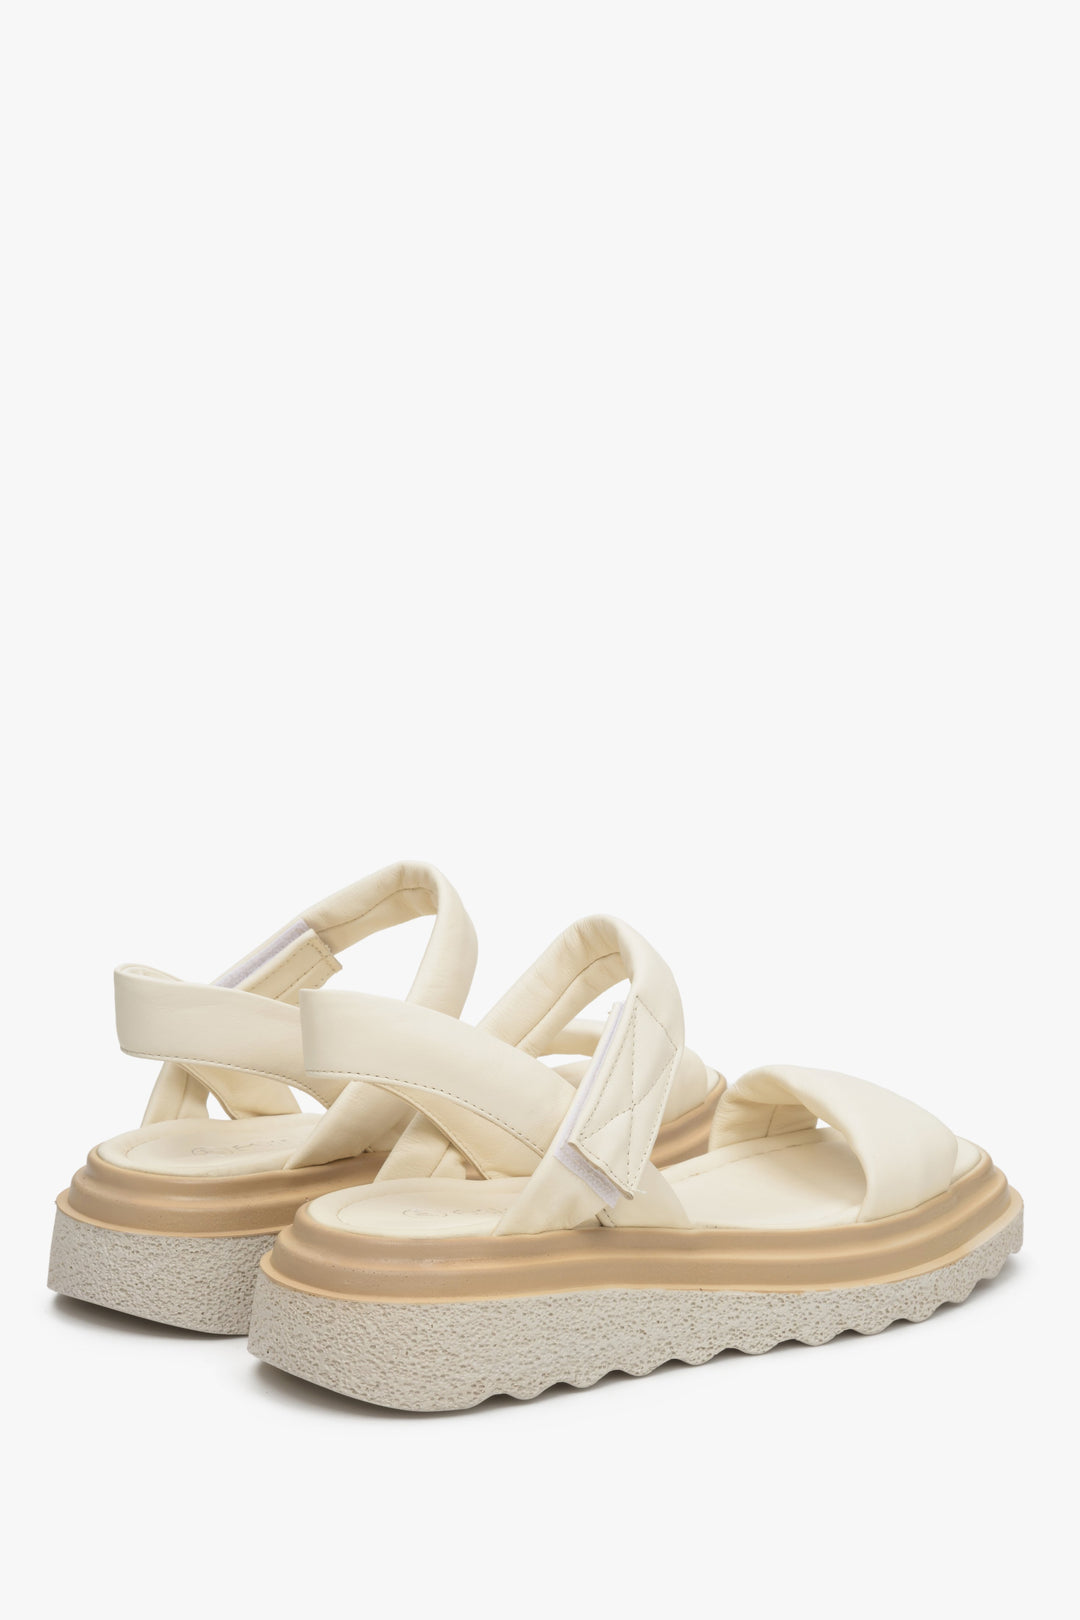 Women's light beige leather sandals with hook-and-loop fastening on an elastic platform - presentation of the model at the back.